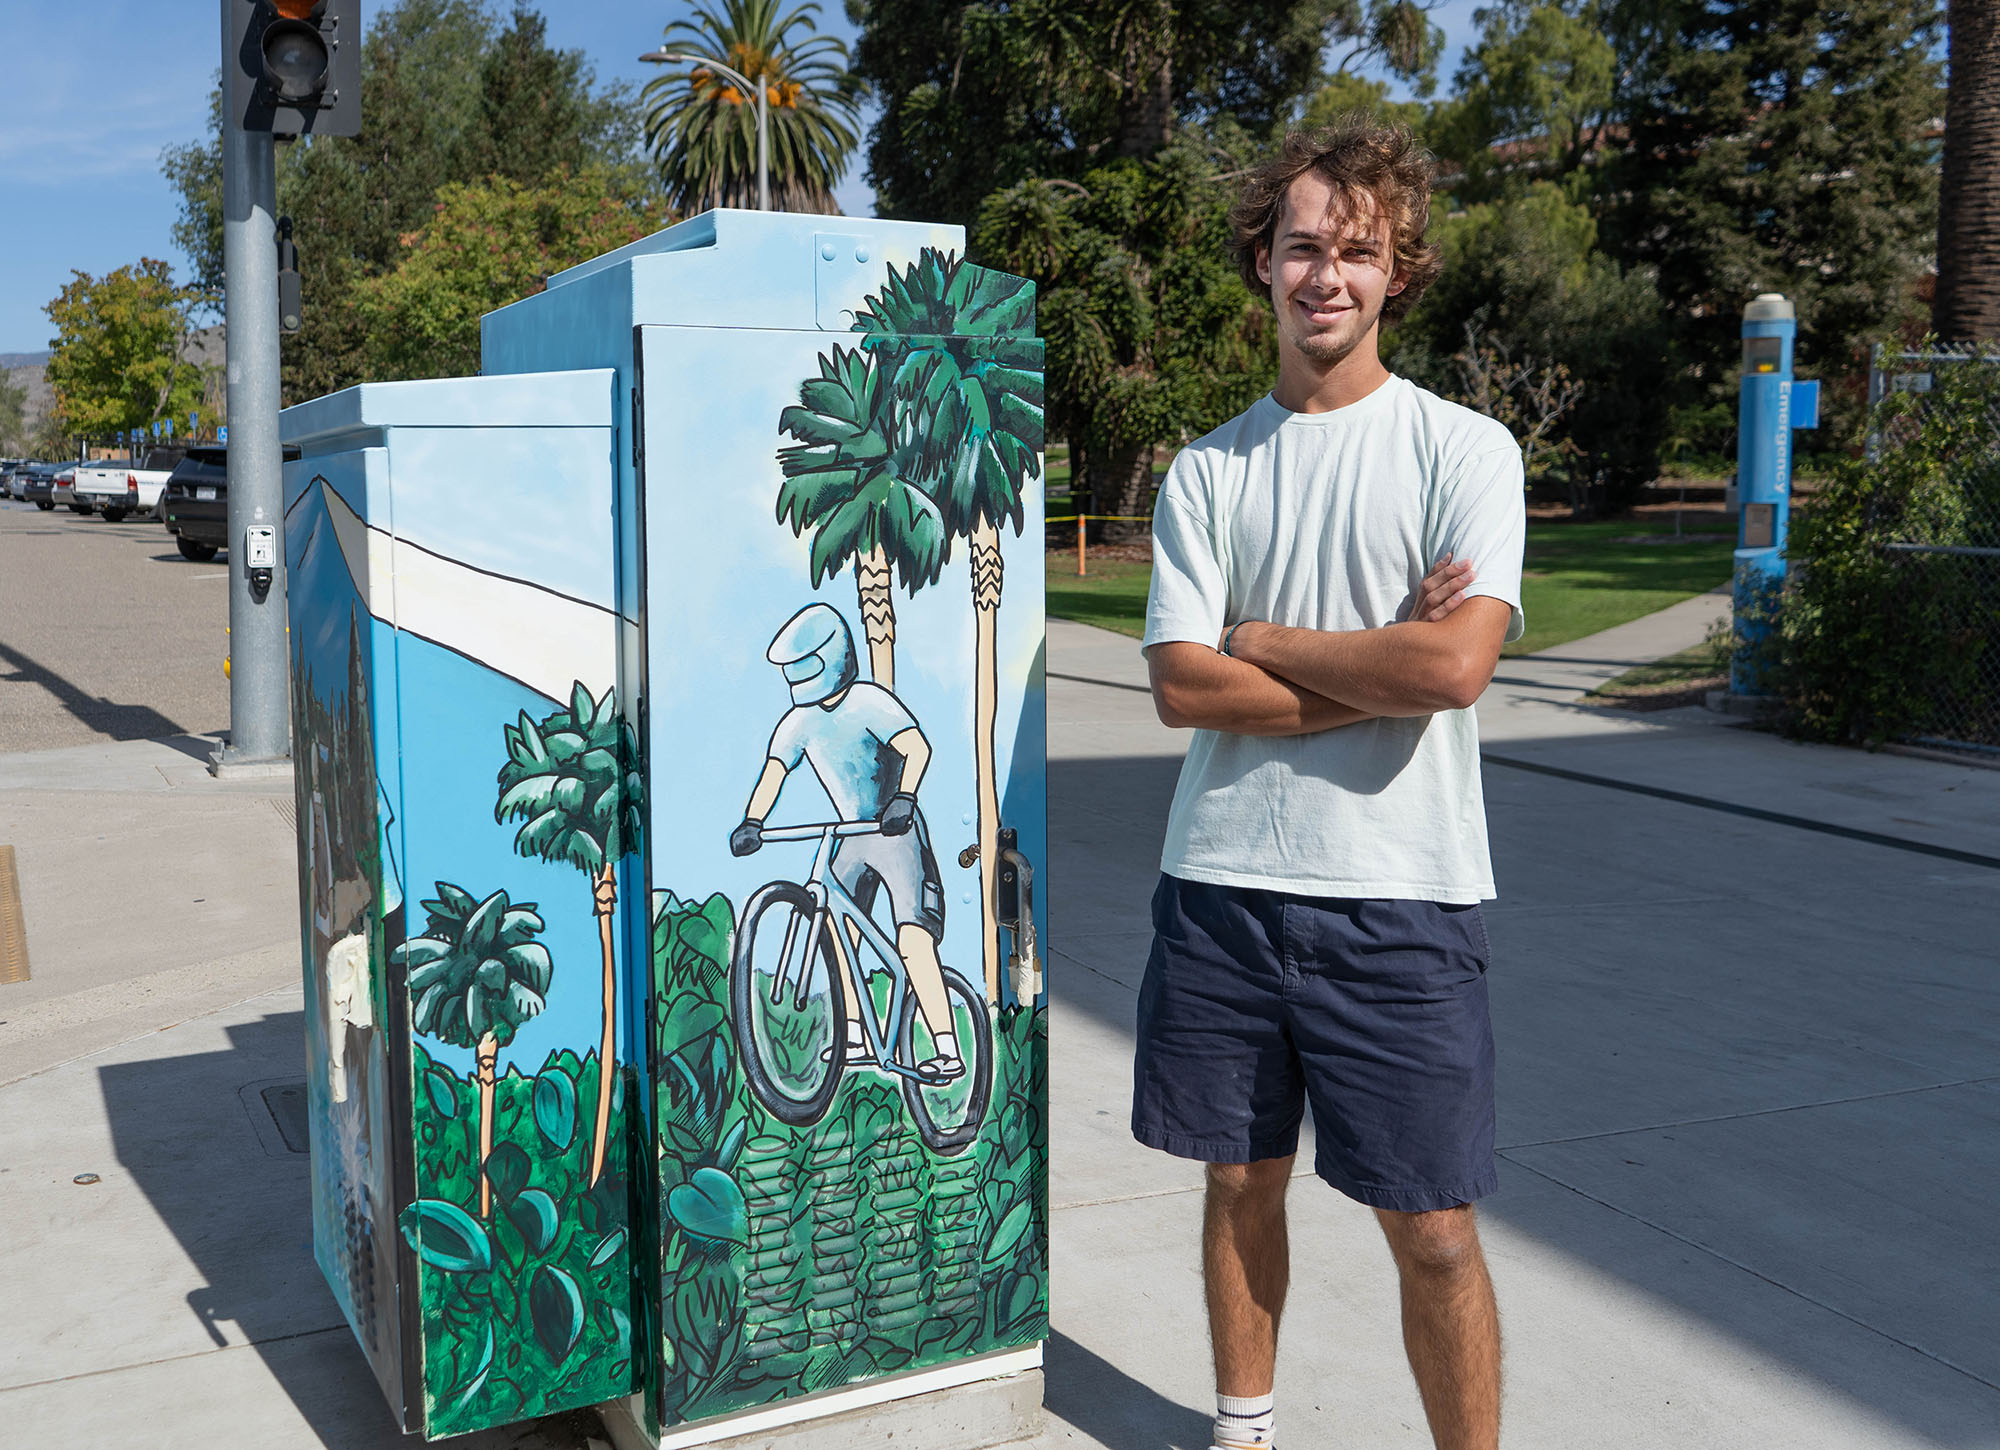 Guy standing next to the utility box